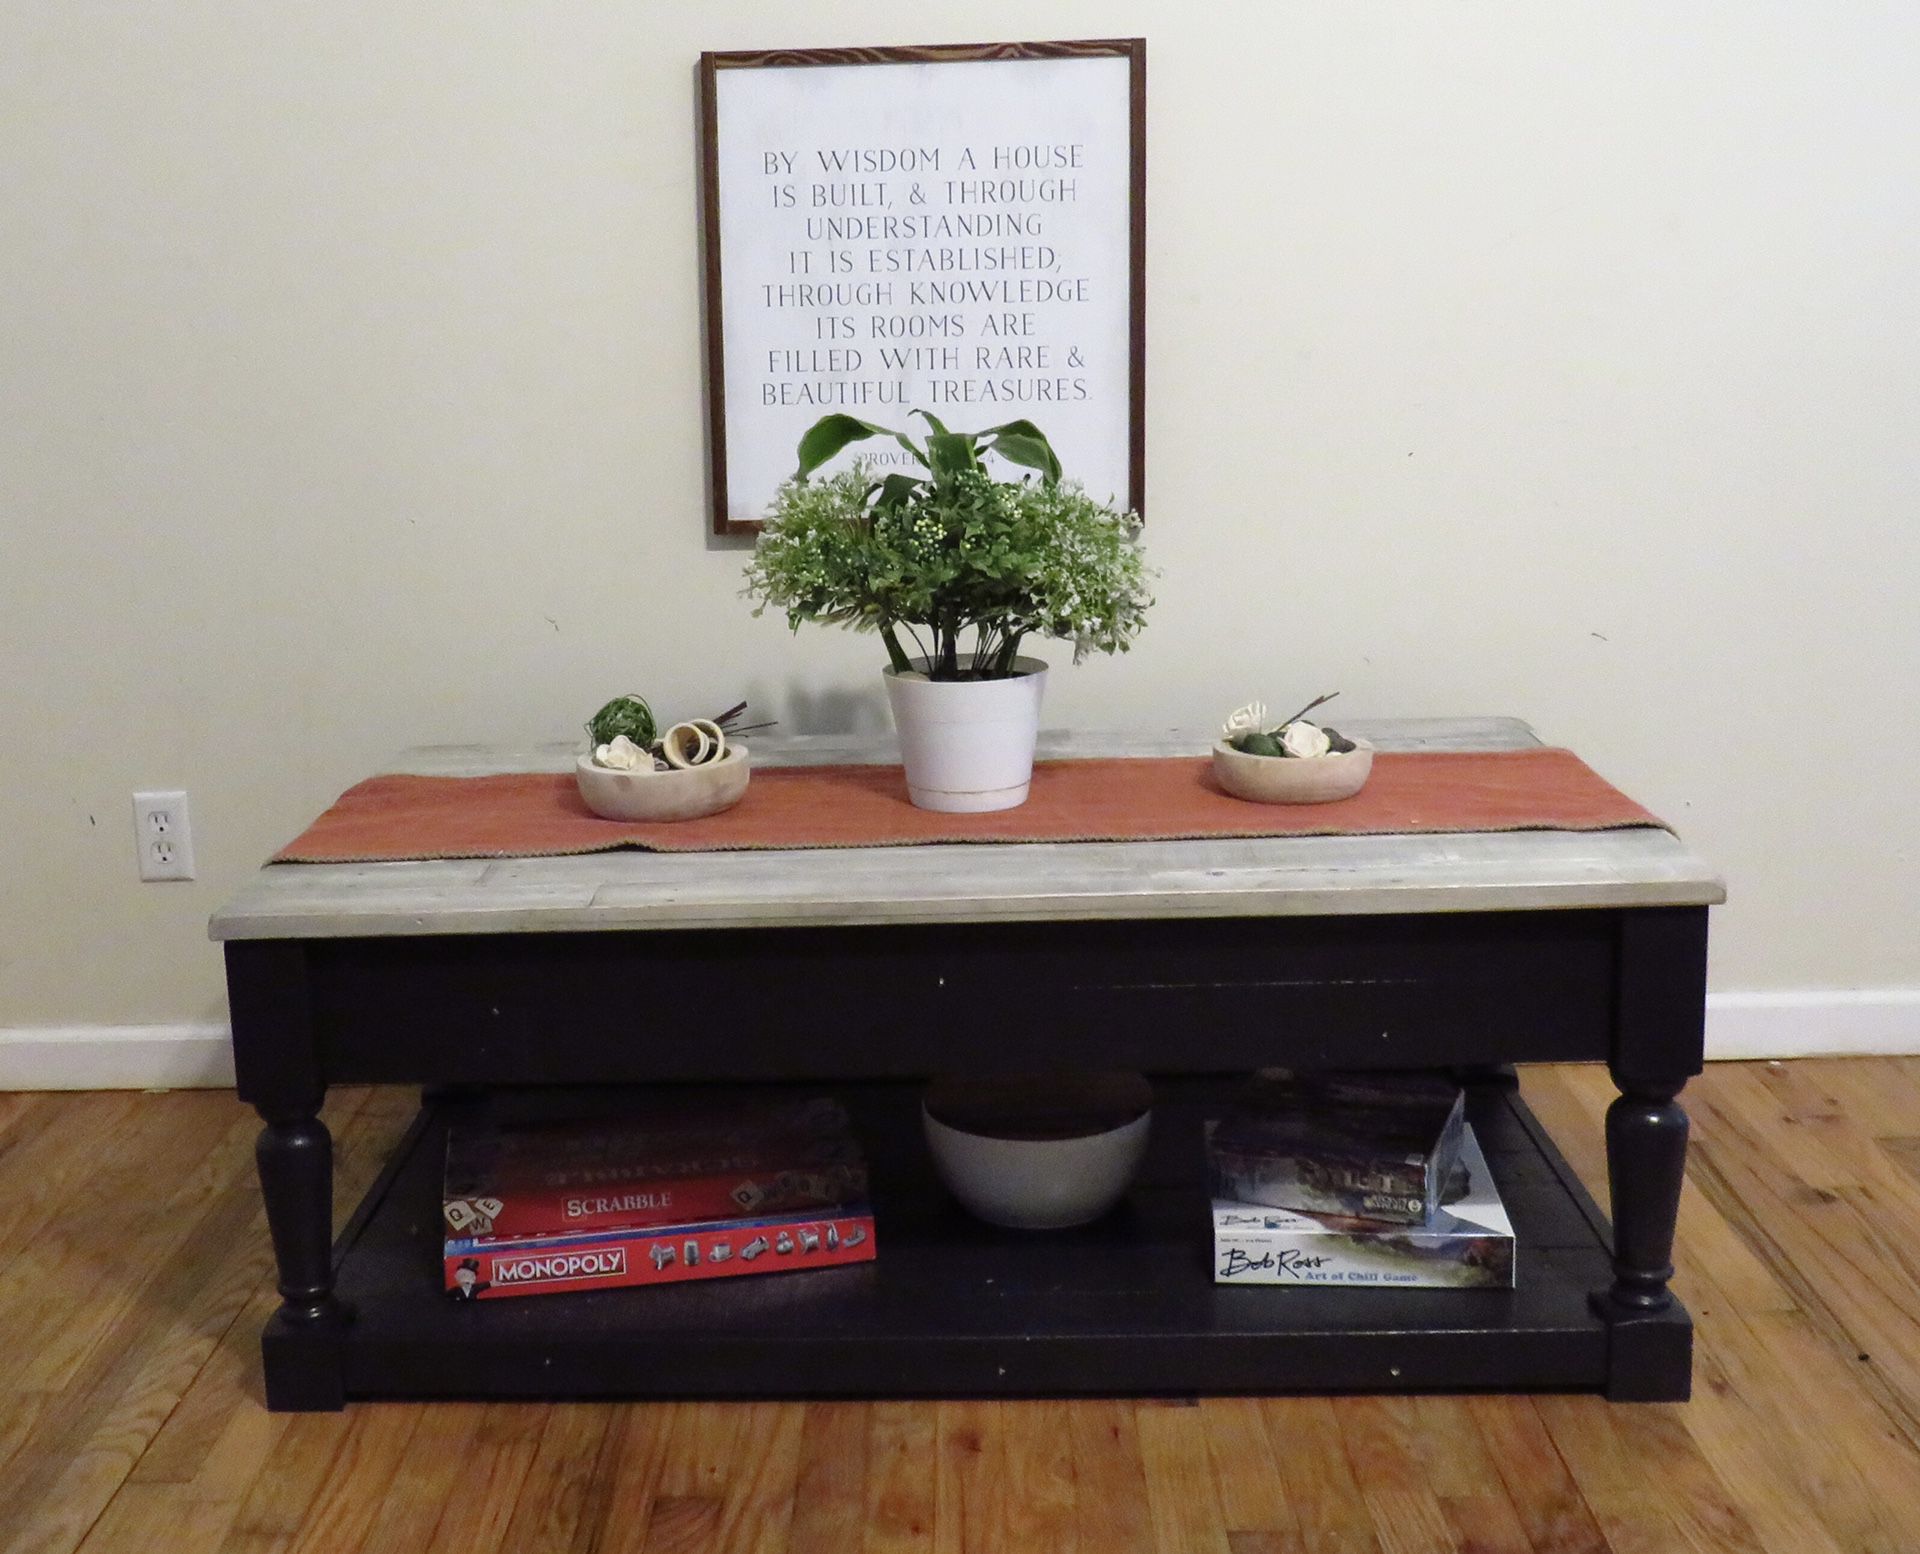 Refinished Rustic Farmhouse Style Coffee Table